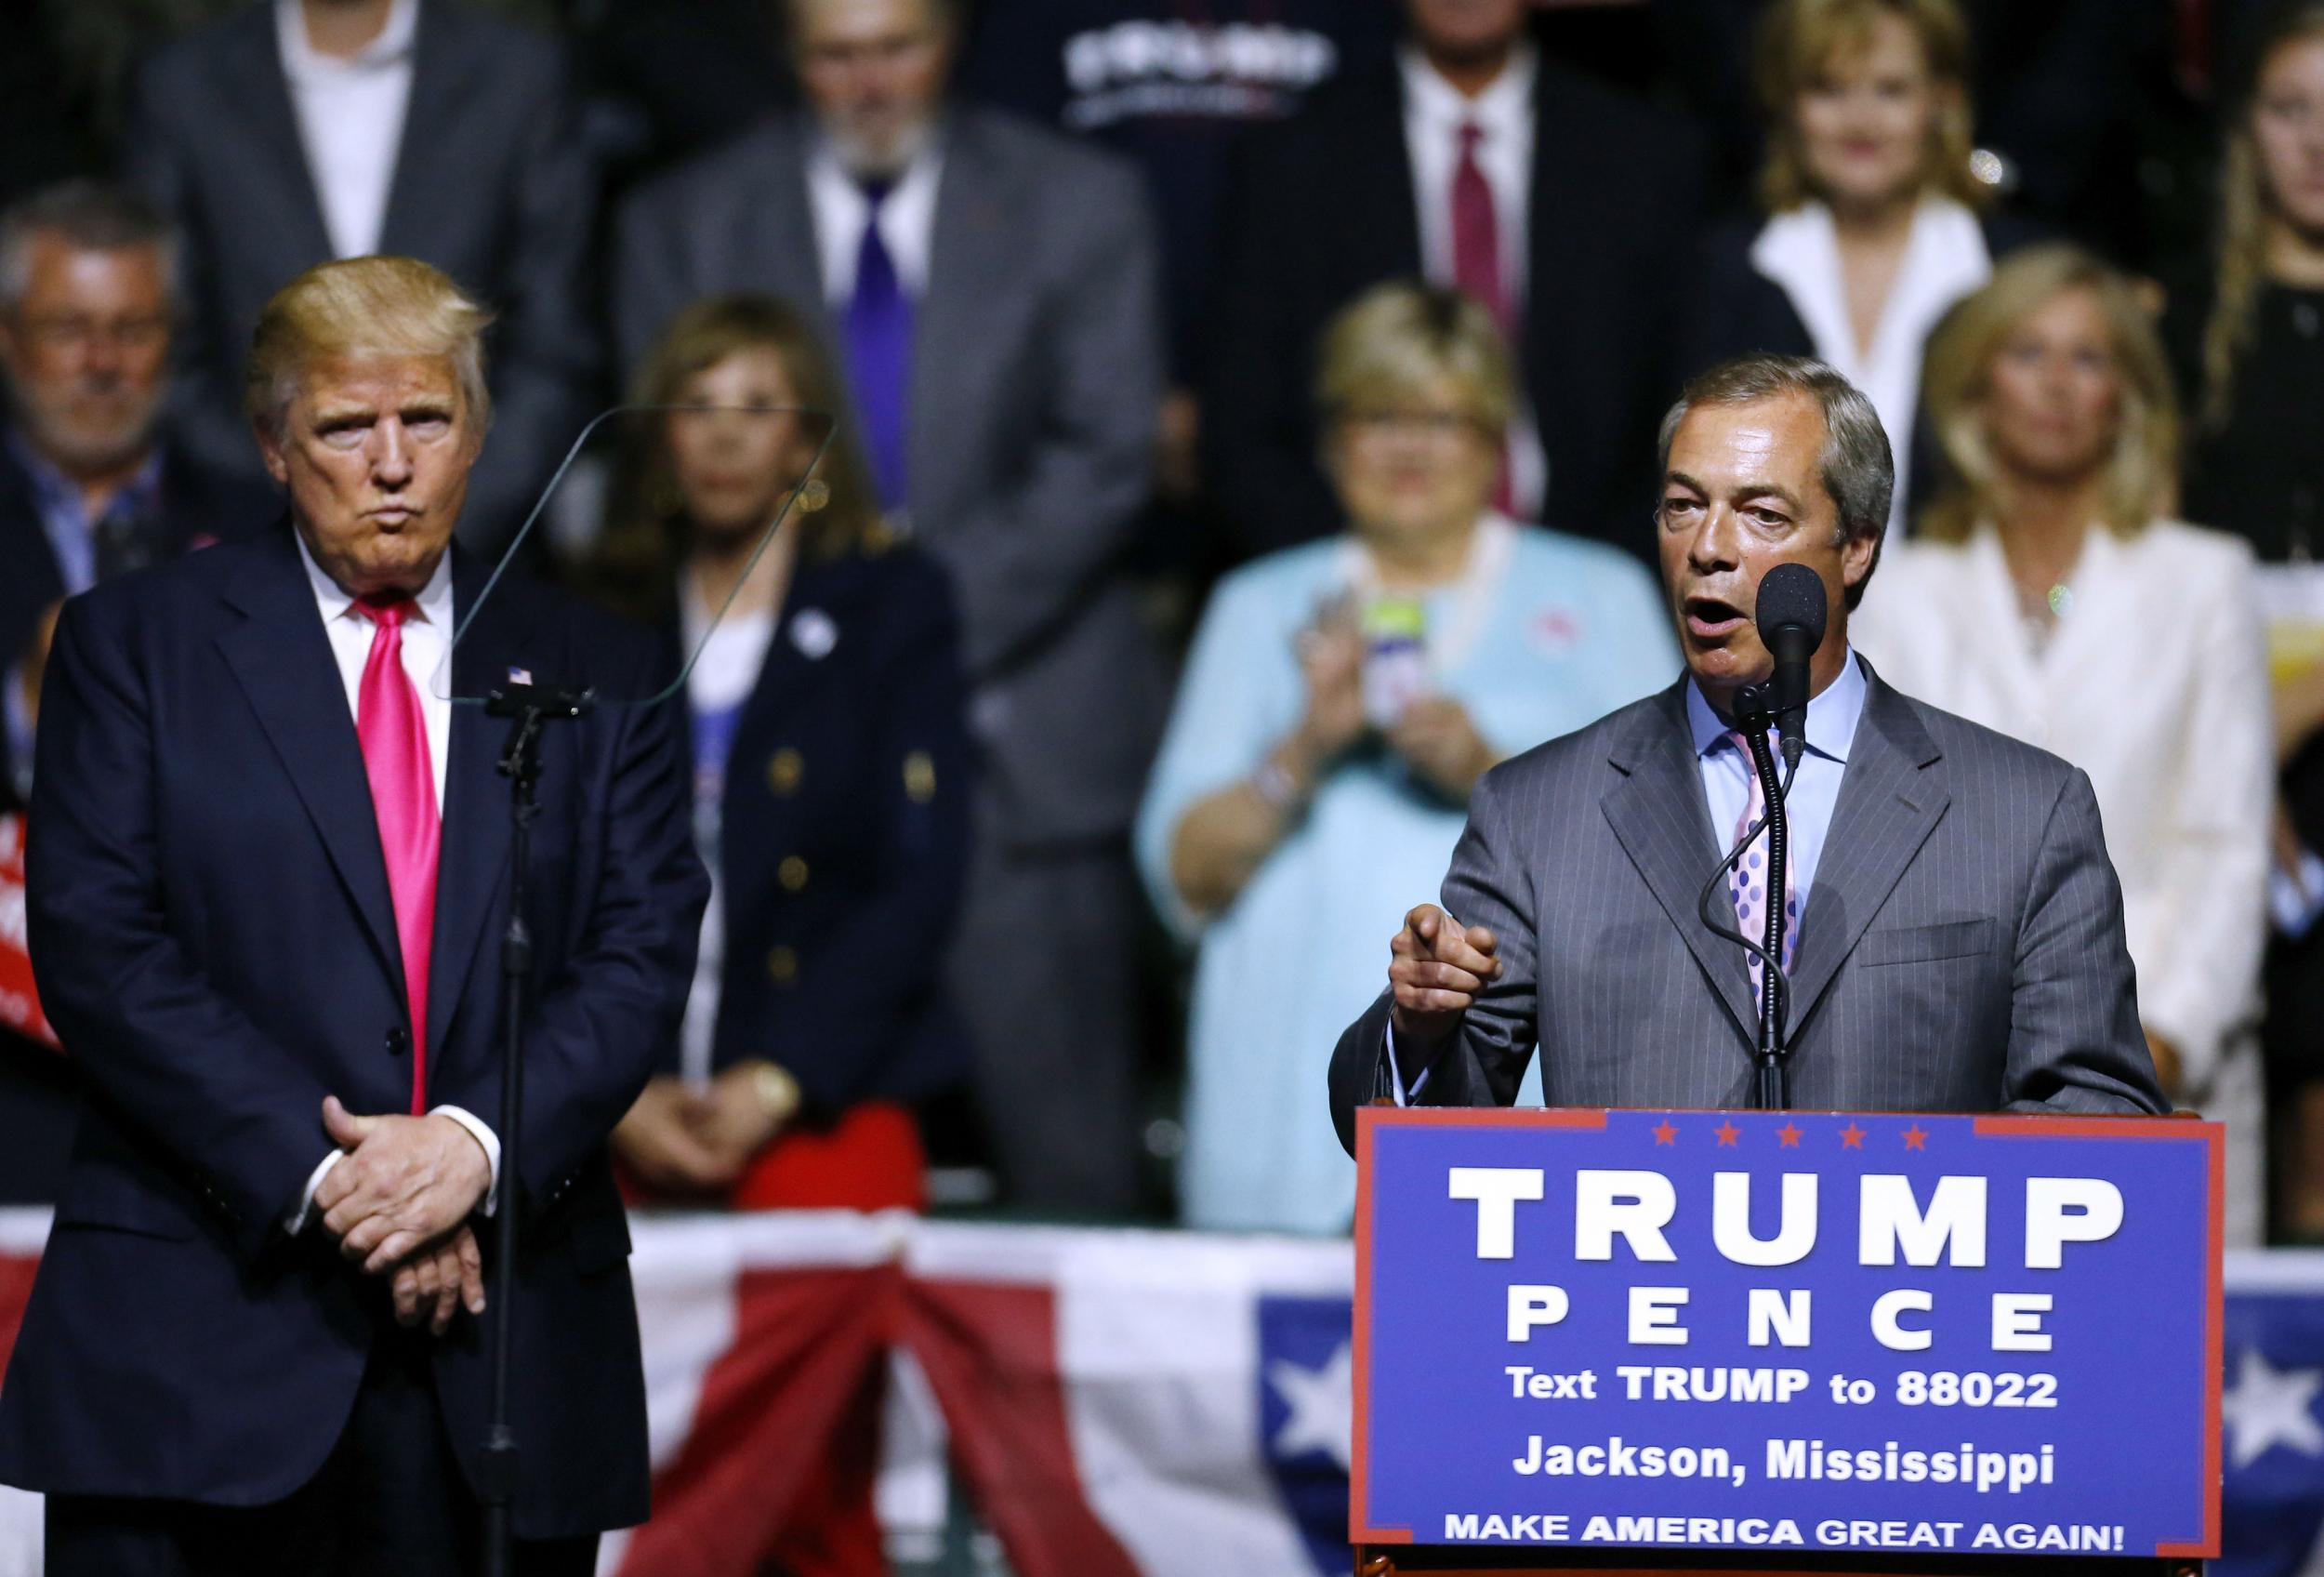 Donald Trump looks on as Nigel Farage speaks for him at a 2016 campaign event